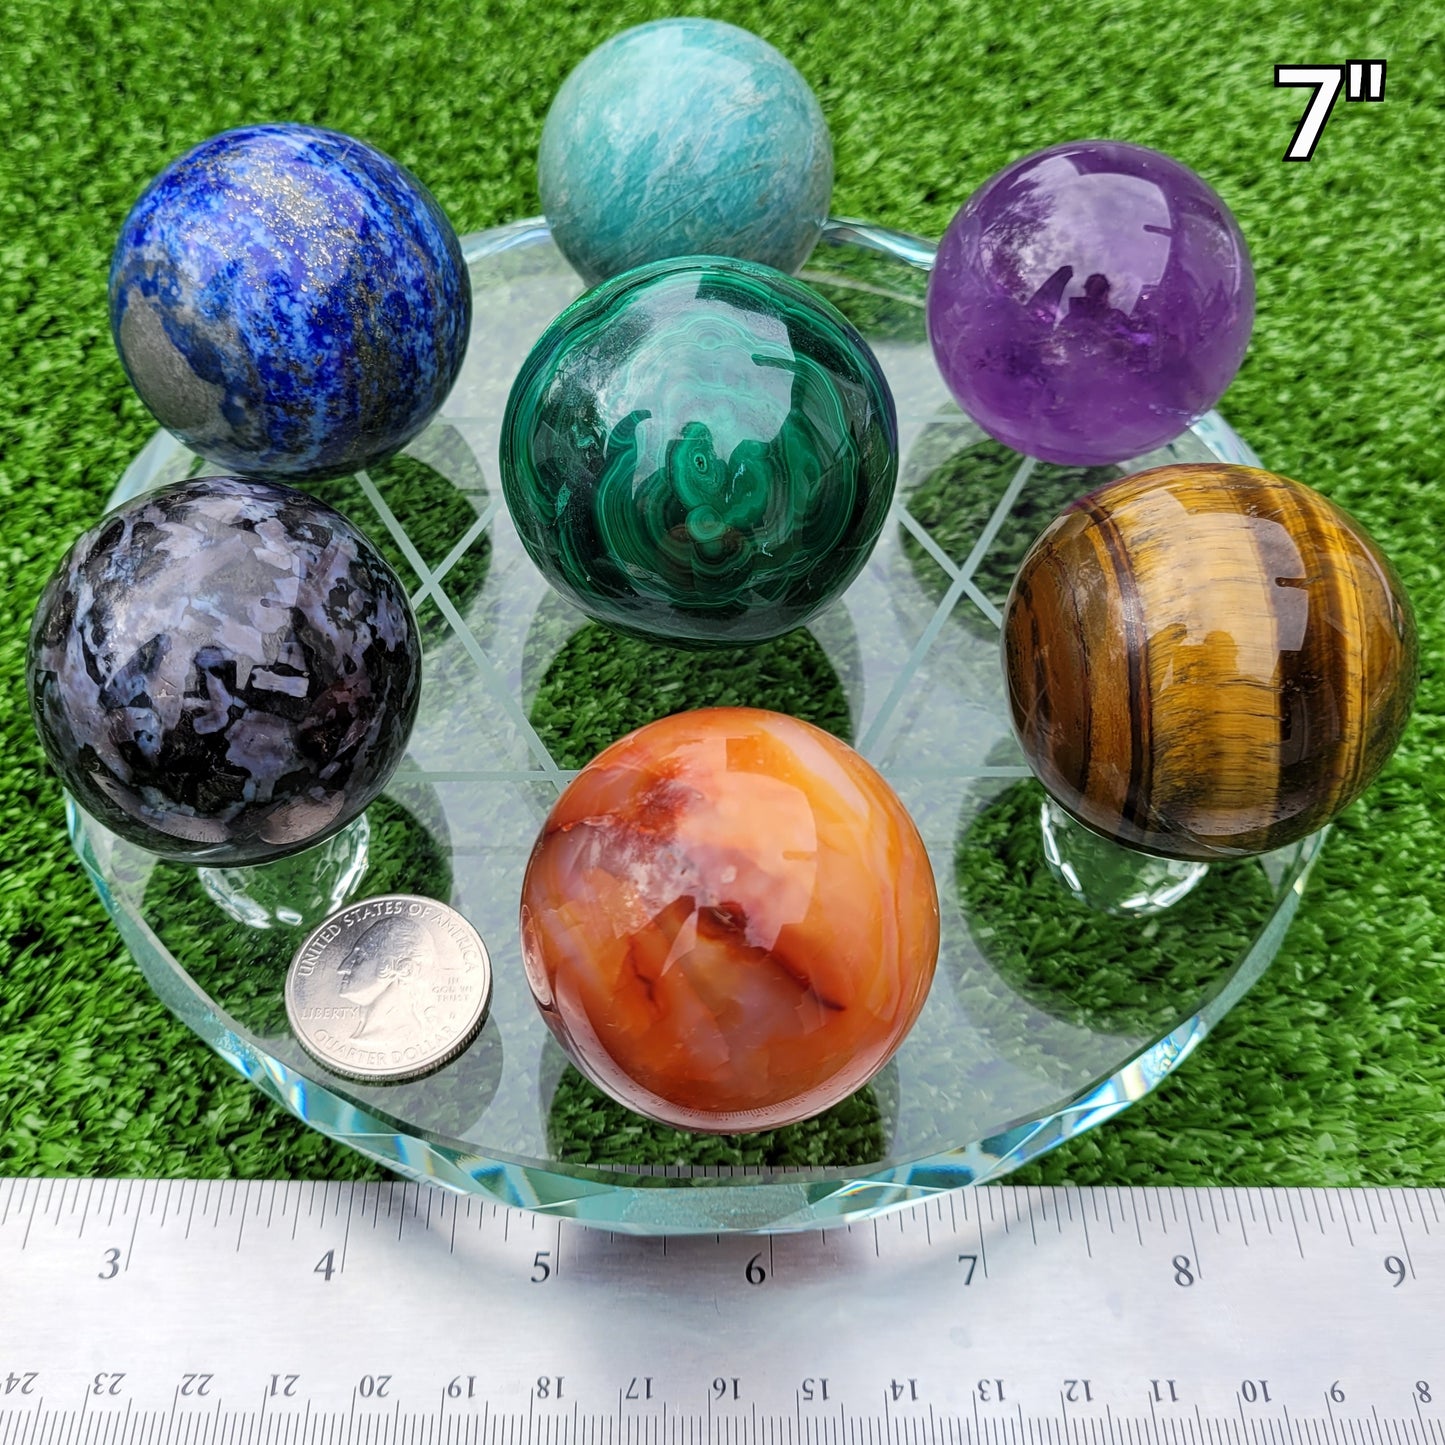 Solid Etched Beveled Glass Sphere Display Plate Stand for 7 Crystal Balls or Eggs 1" to 3" (25mm to 77mm)